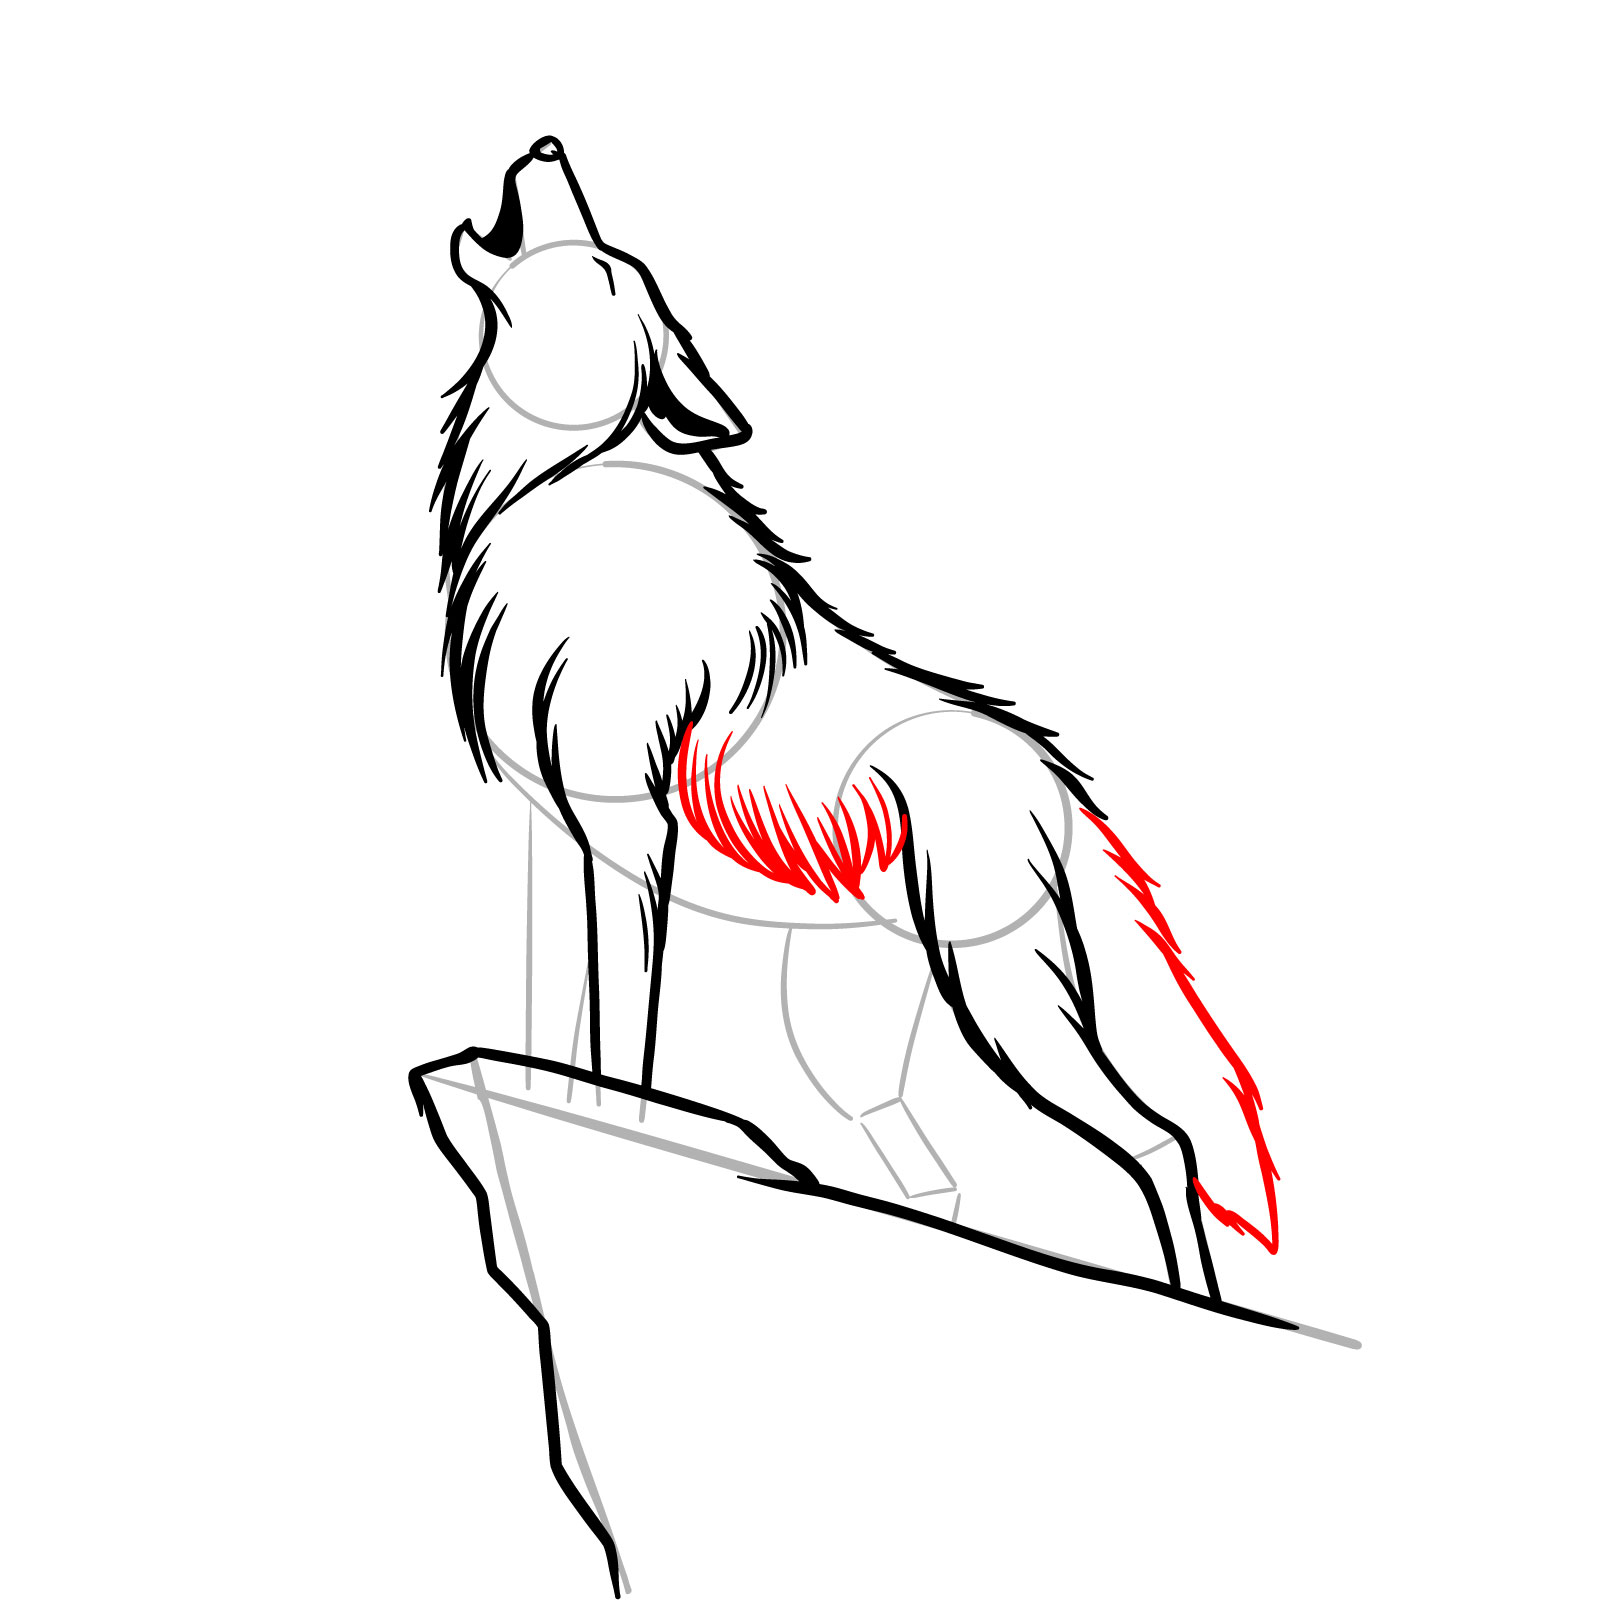 Adding the belly fur and tail to the howling wolf sketch - step 09